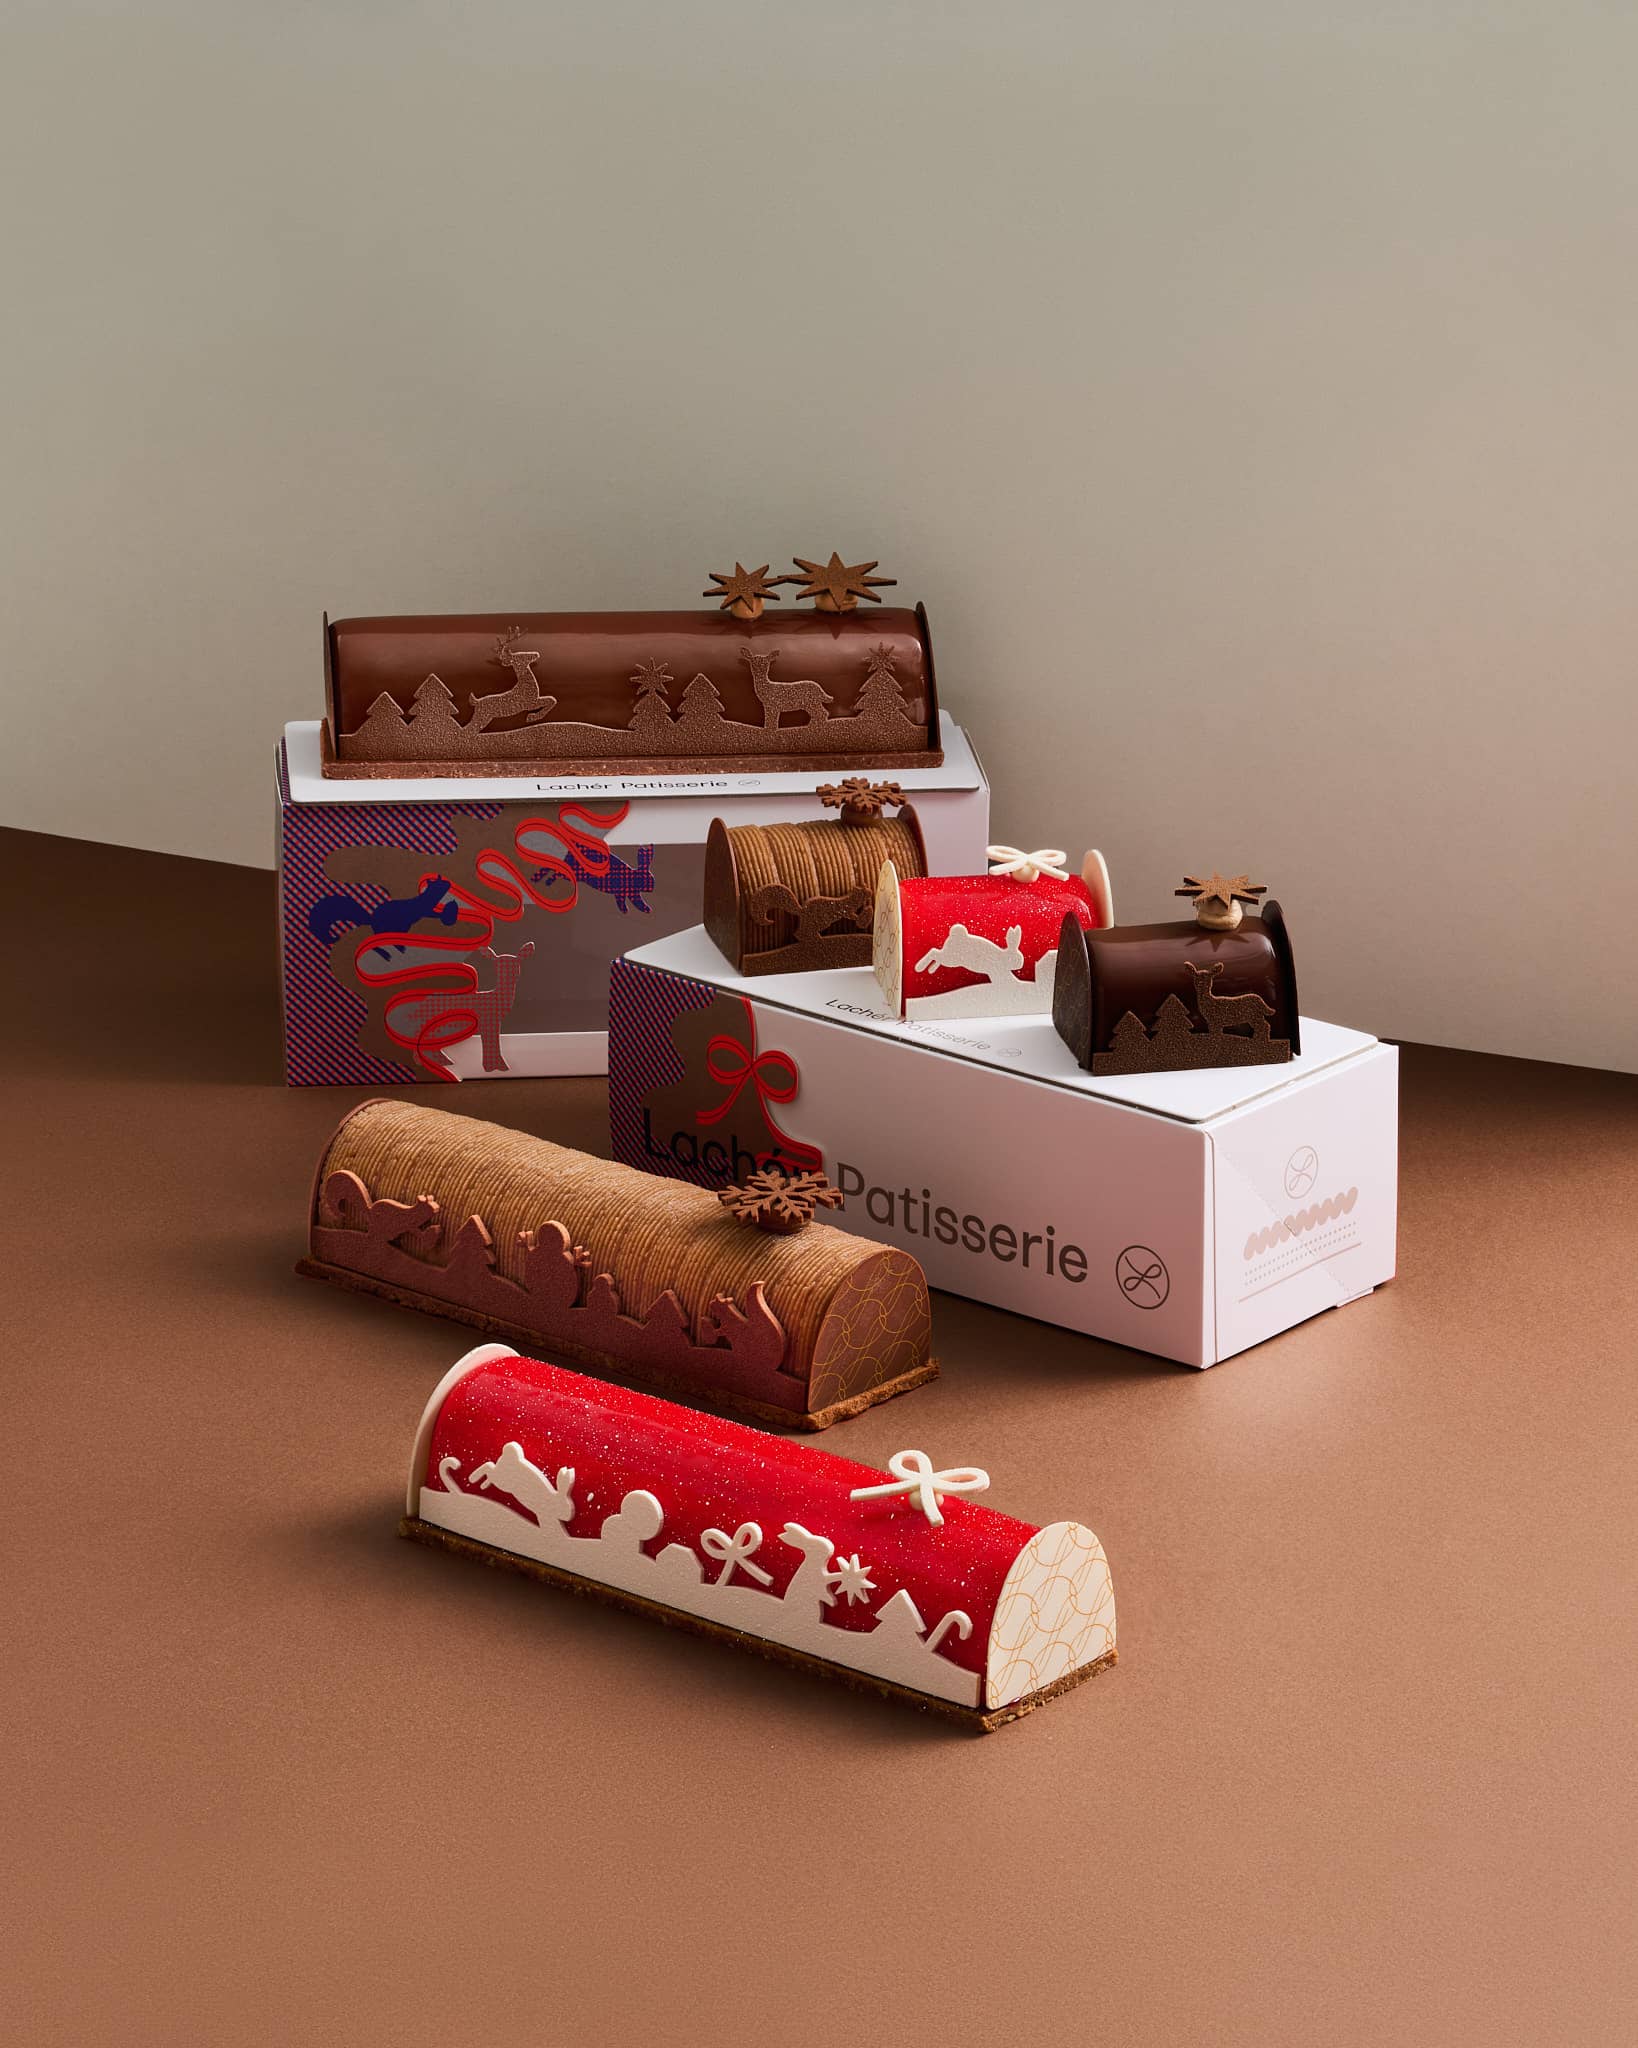 10 Reasons You Need Lachér Patisserie's Christmas Log Cake Delivery Now!